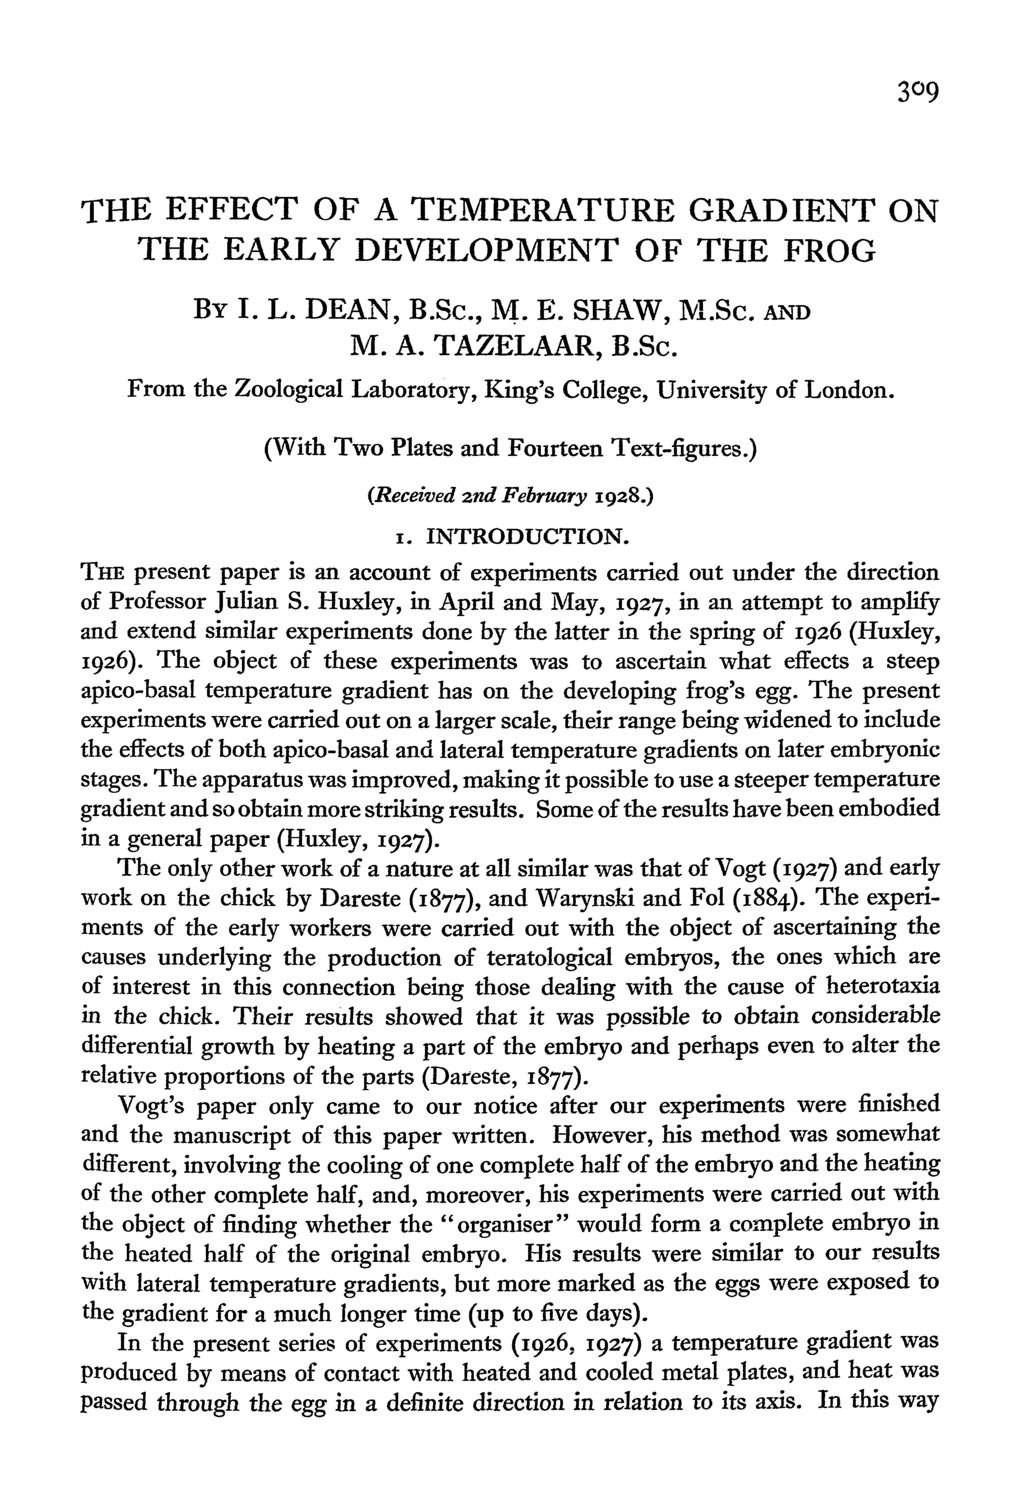 309 THE EFFECT OF A TEMPERATURE GRADIENT ON THE EARLY DEVELOPMENT OF THE FROG BY I. L. DEAN, B.Sc, M. E. SHAW, M.Sc. AND M. A. TAZELAAR, B.Sc. From the Zoological Laboratory, King's College, University of London.